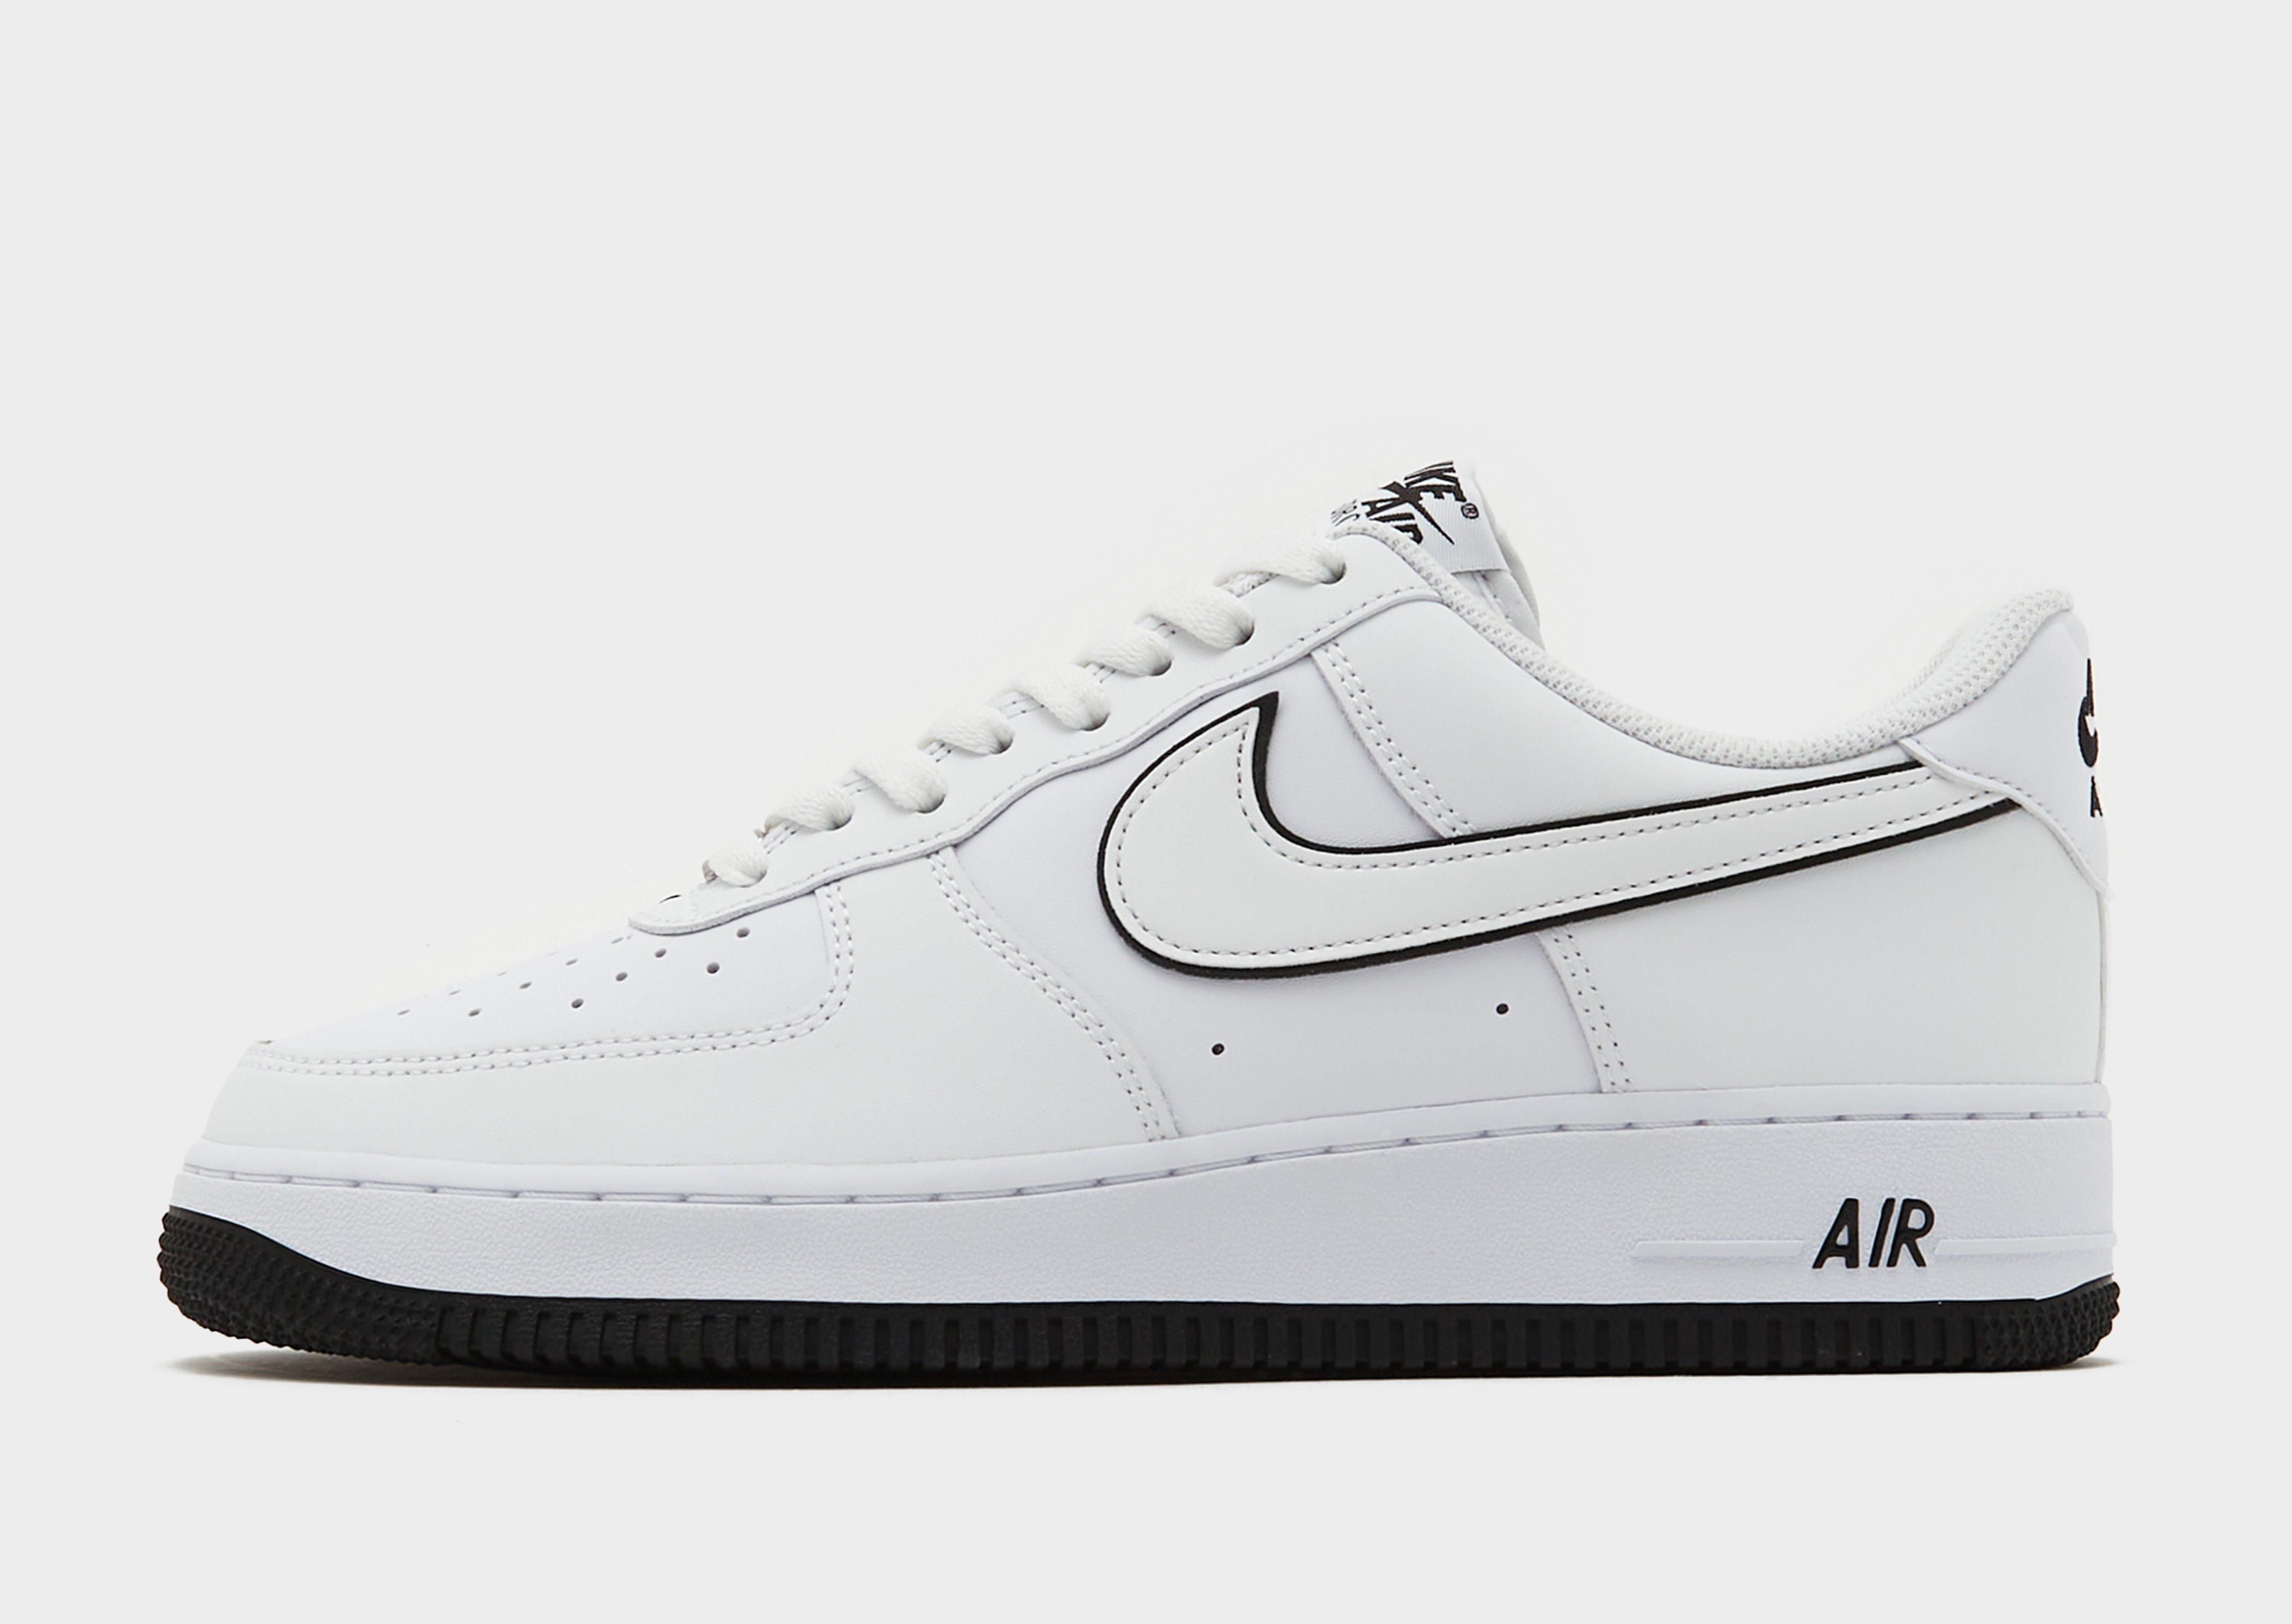 Nike Air Force 1 Low White Black 25.5専用はお断りさせていただきます